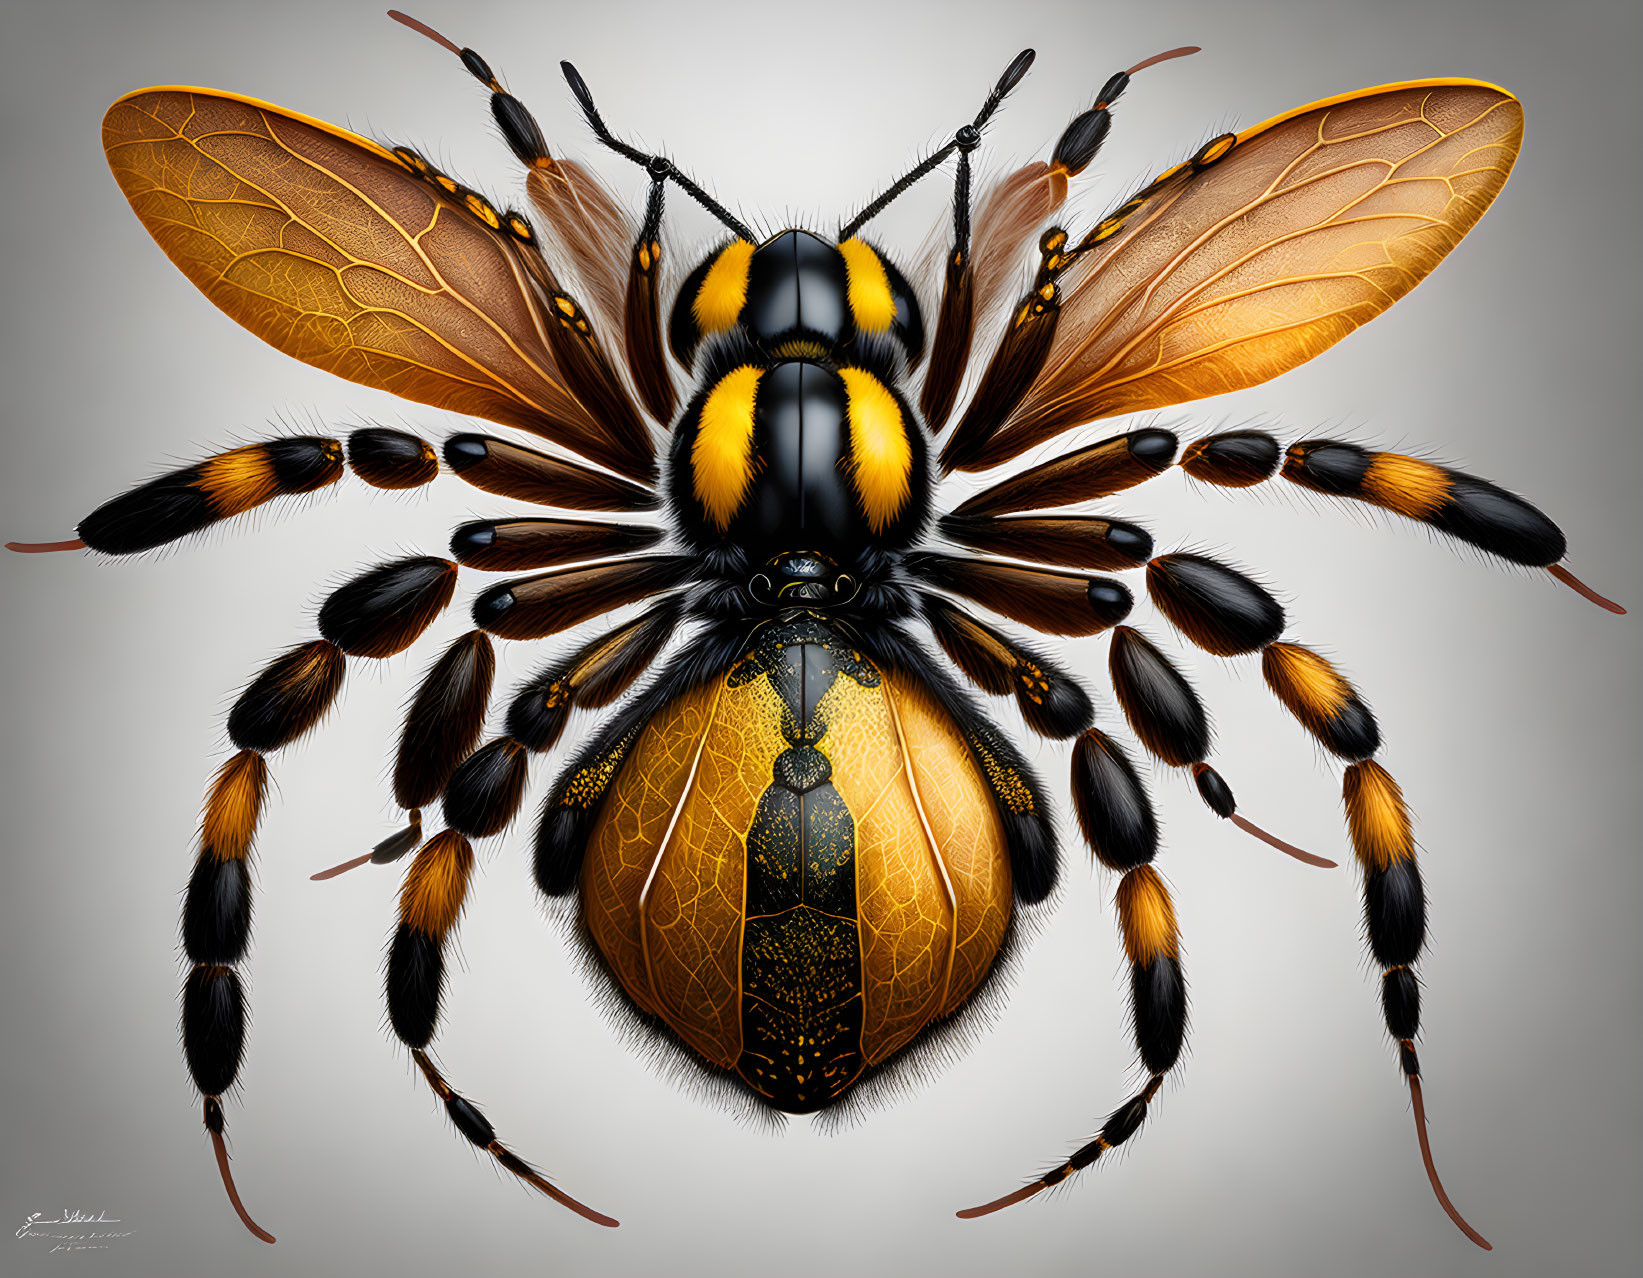 Detailed digital artwork: Fantastical creature with bee and spider features, golden-orange wings, black &